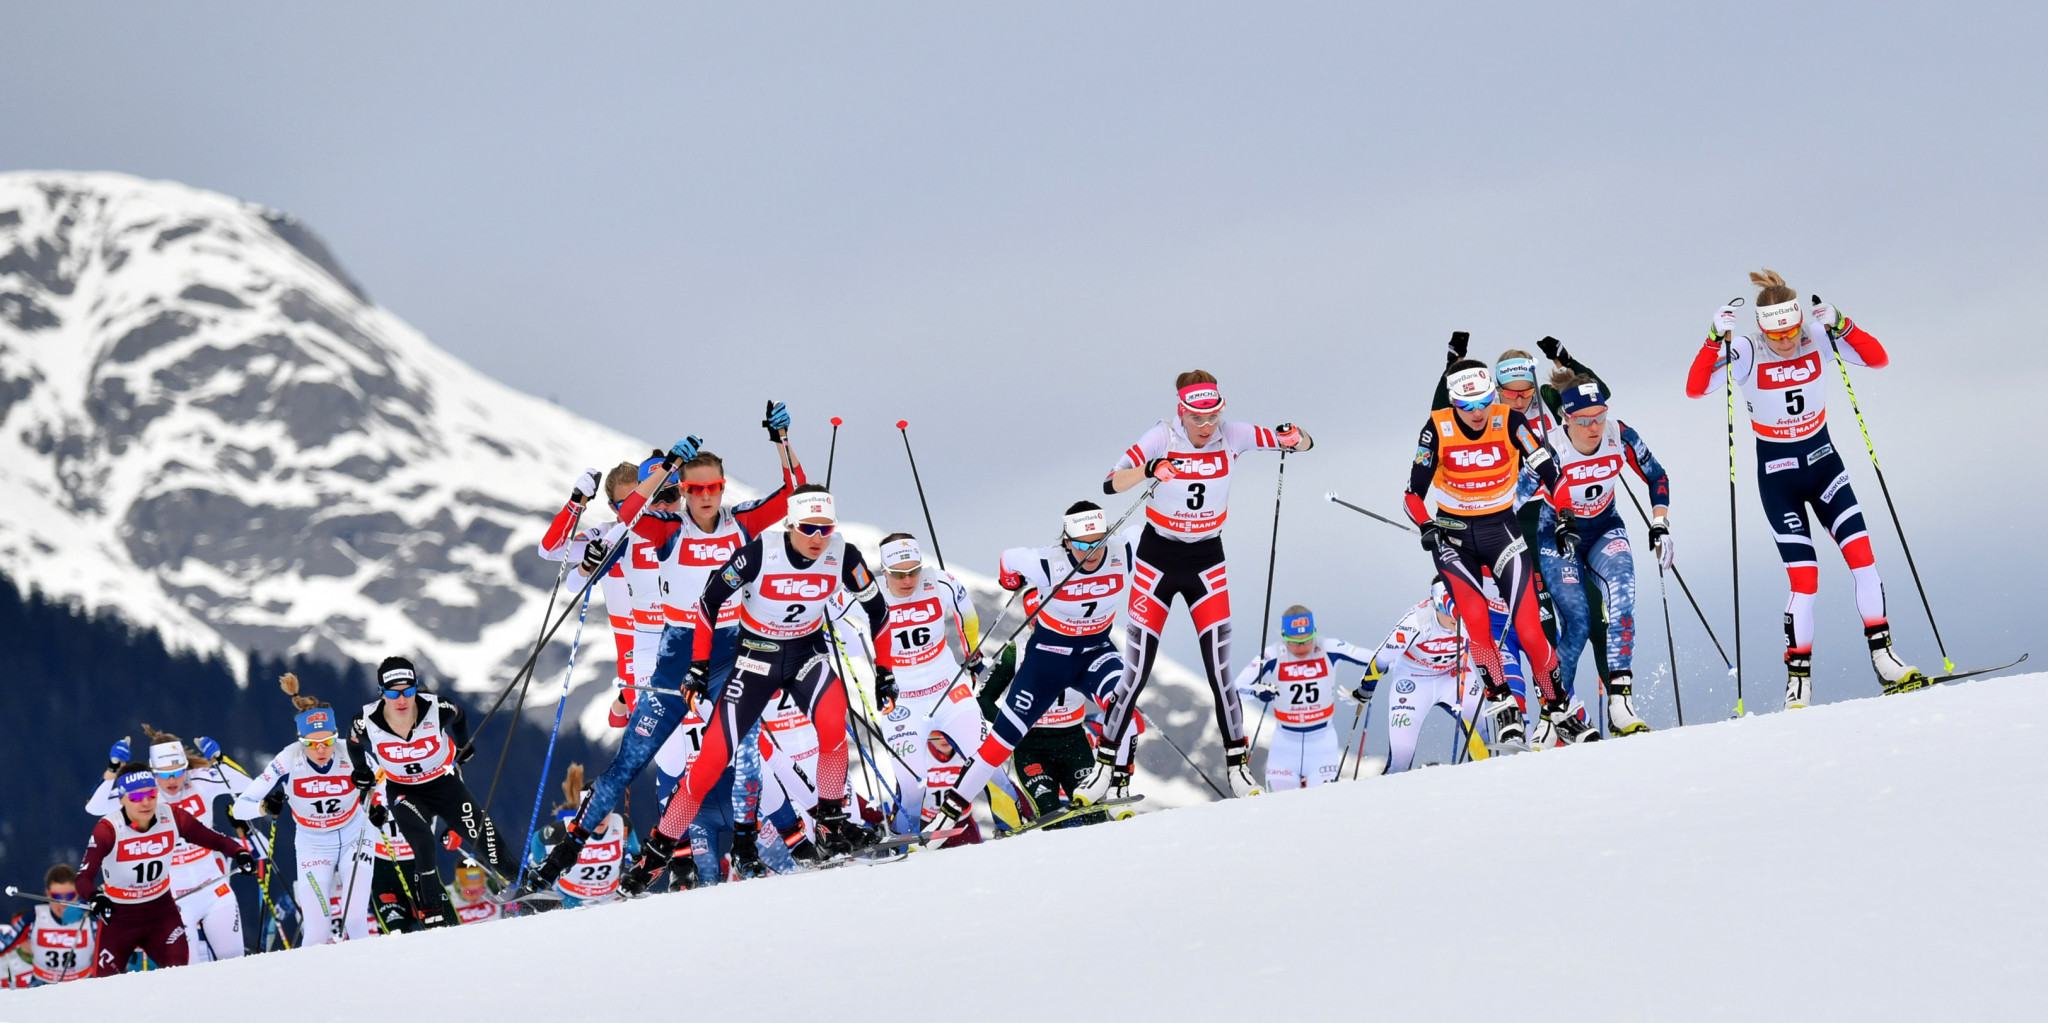 The FIS Coordination Group has gathered in Seefeld for its semi-annual meeting to review preparations for the 2019 Nordic World Ski Championships in the Austrian village ©Getty Images